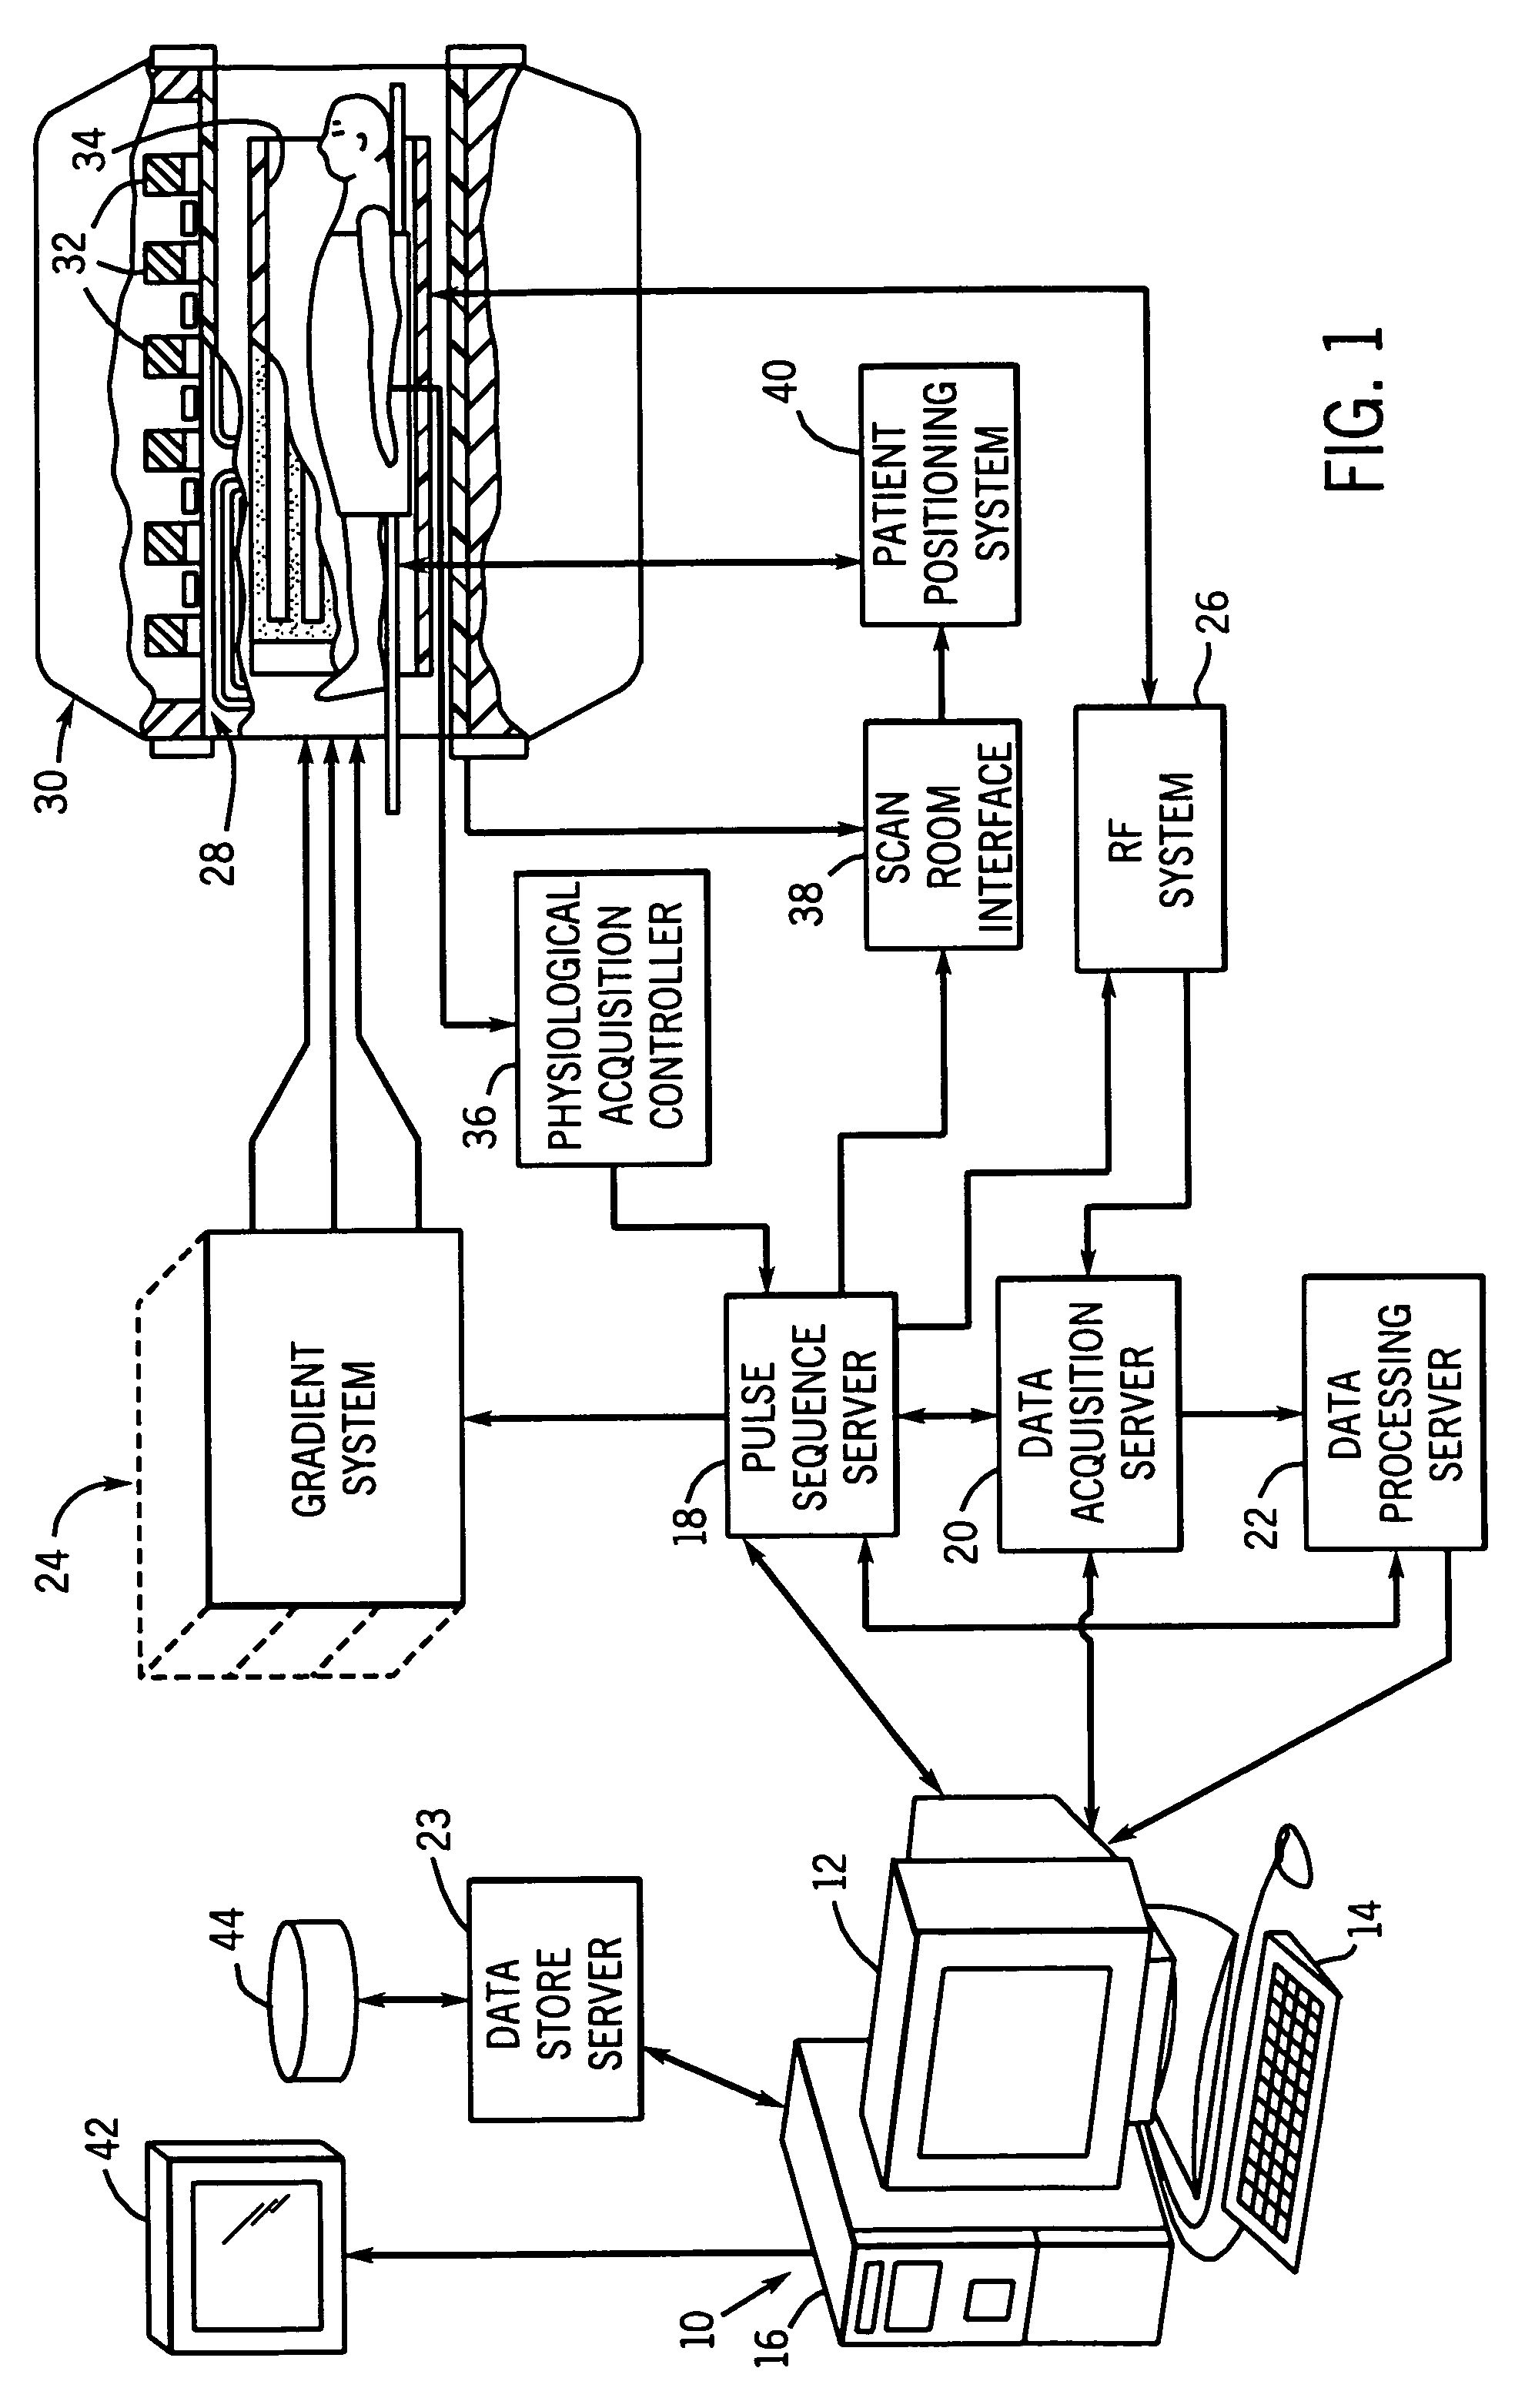 Graphic application development system for a medical imaging system